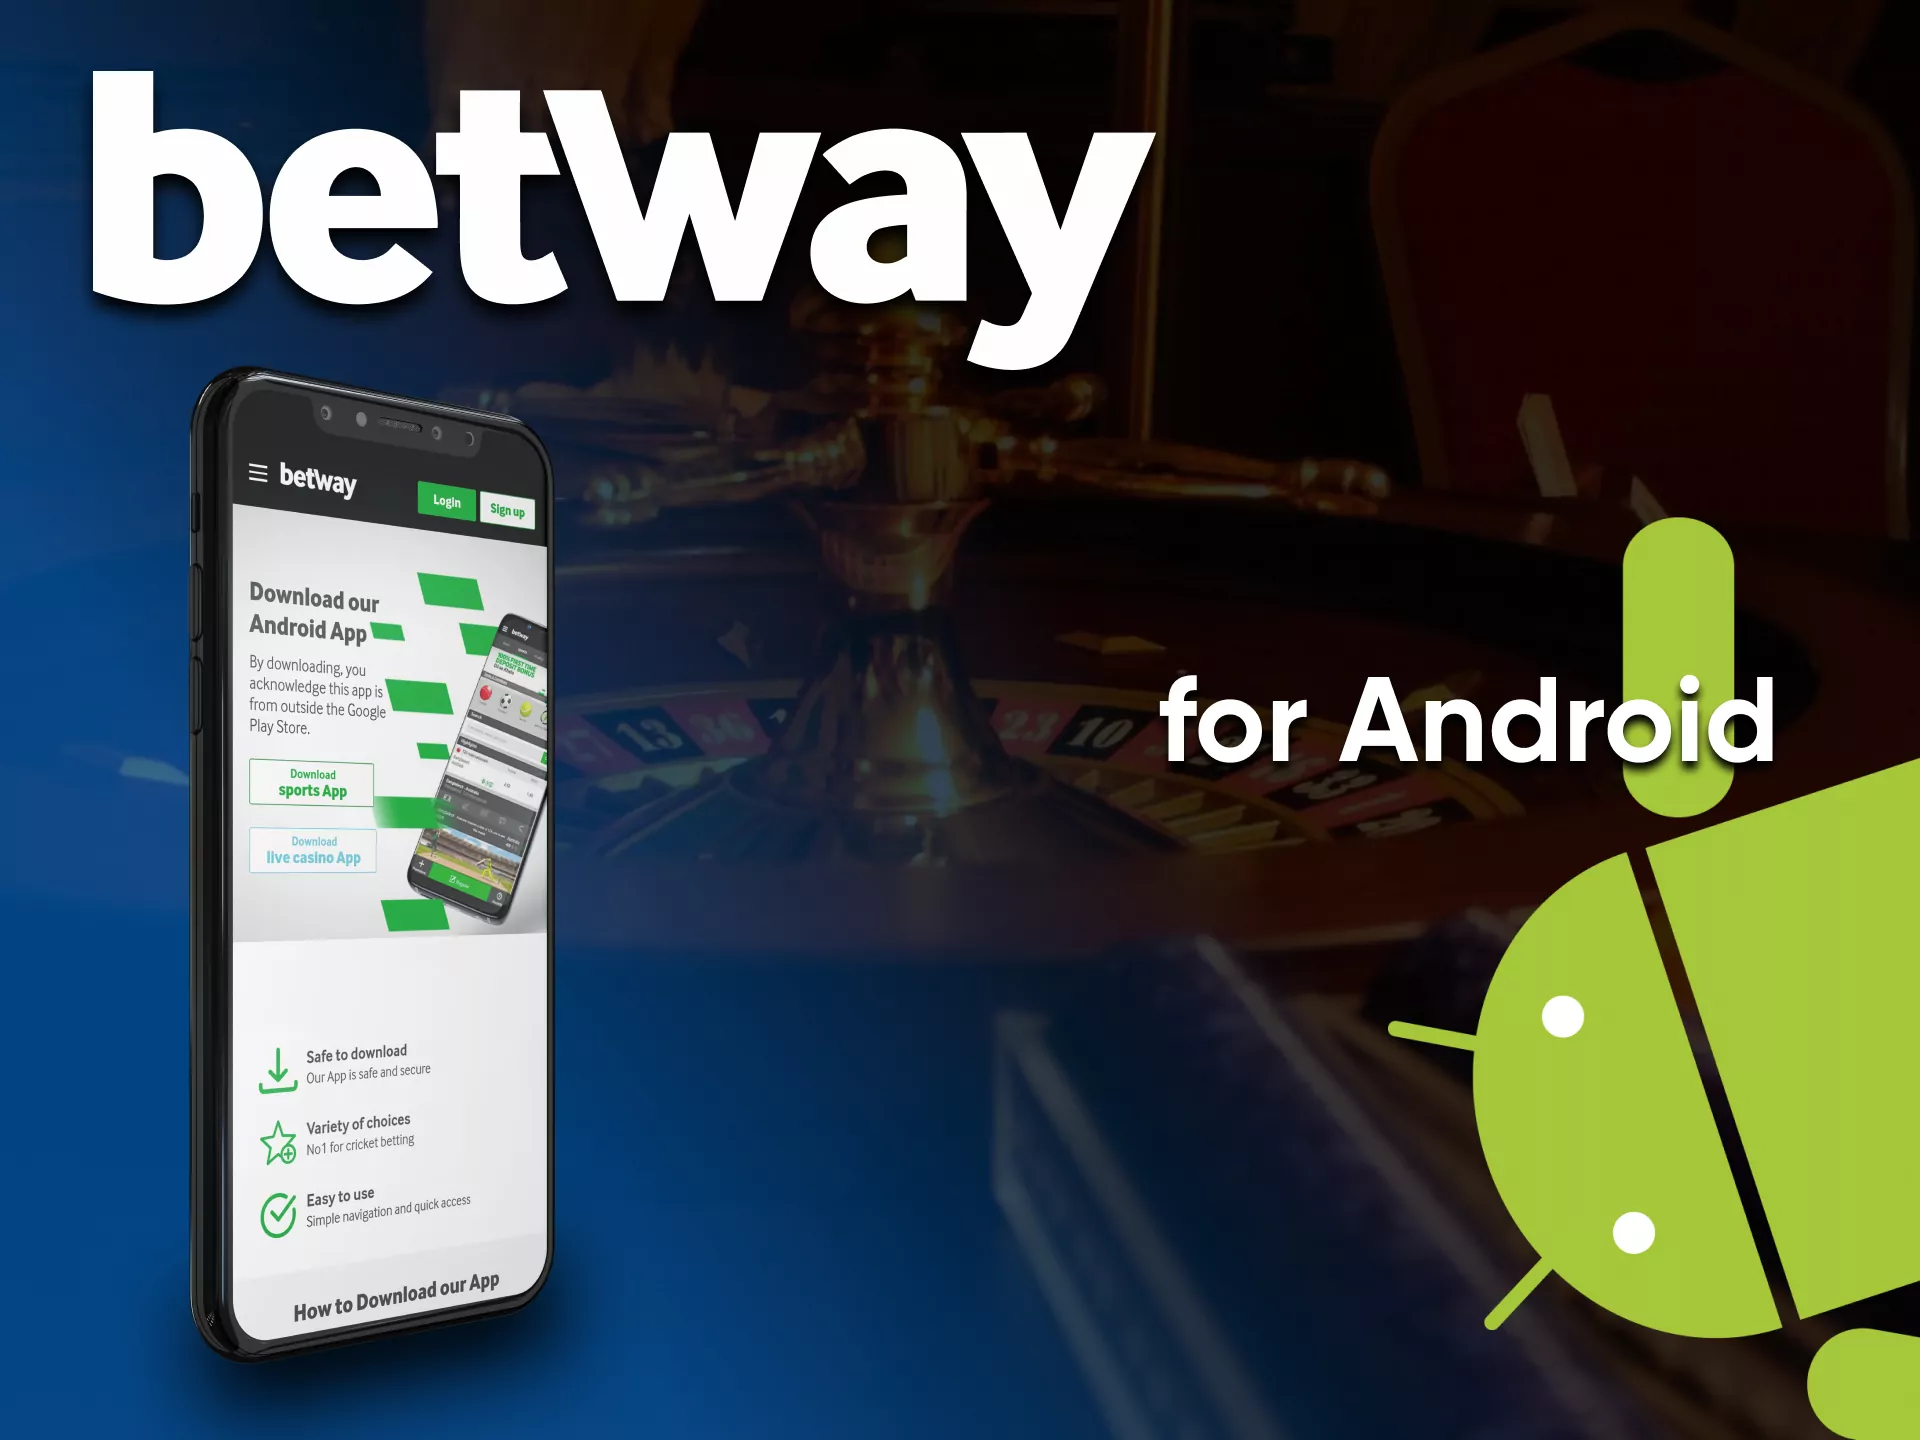 Download the app Betway for casino games on Android.